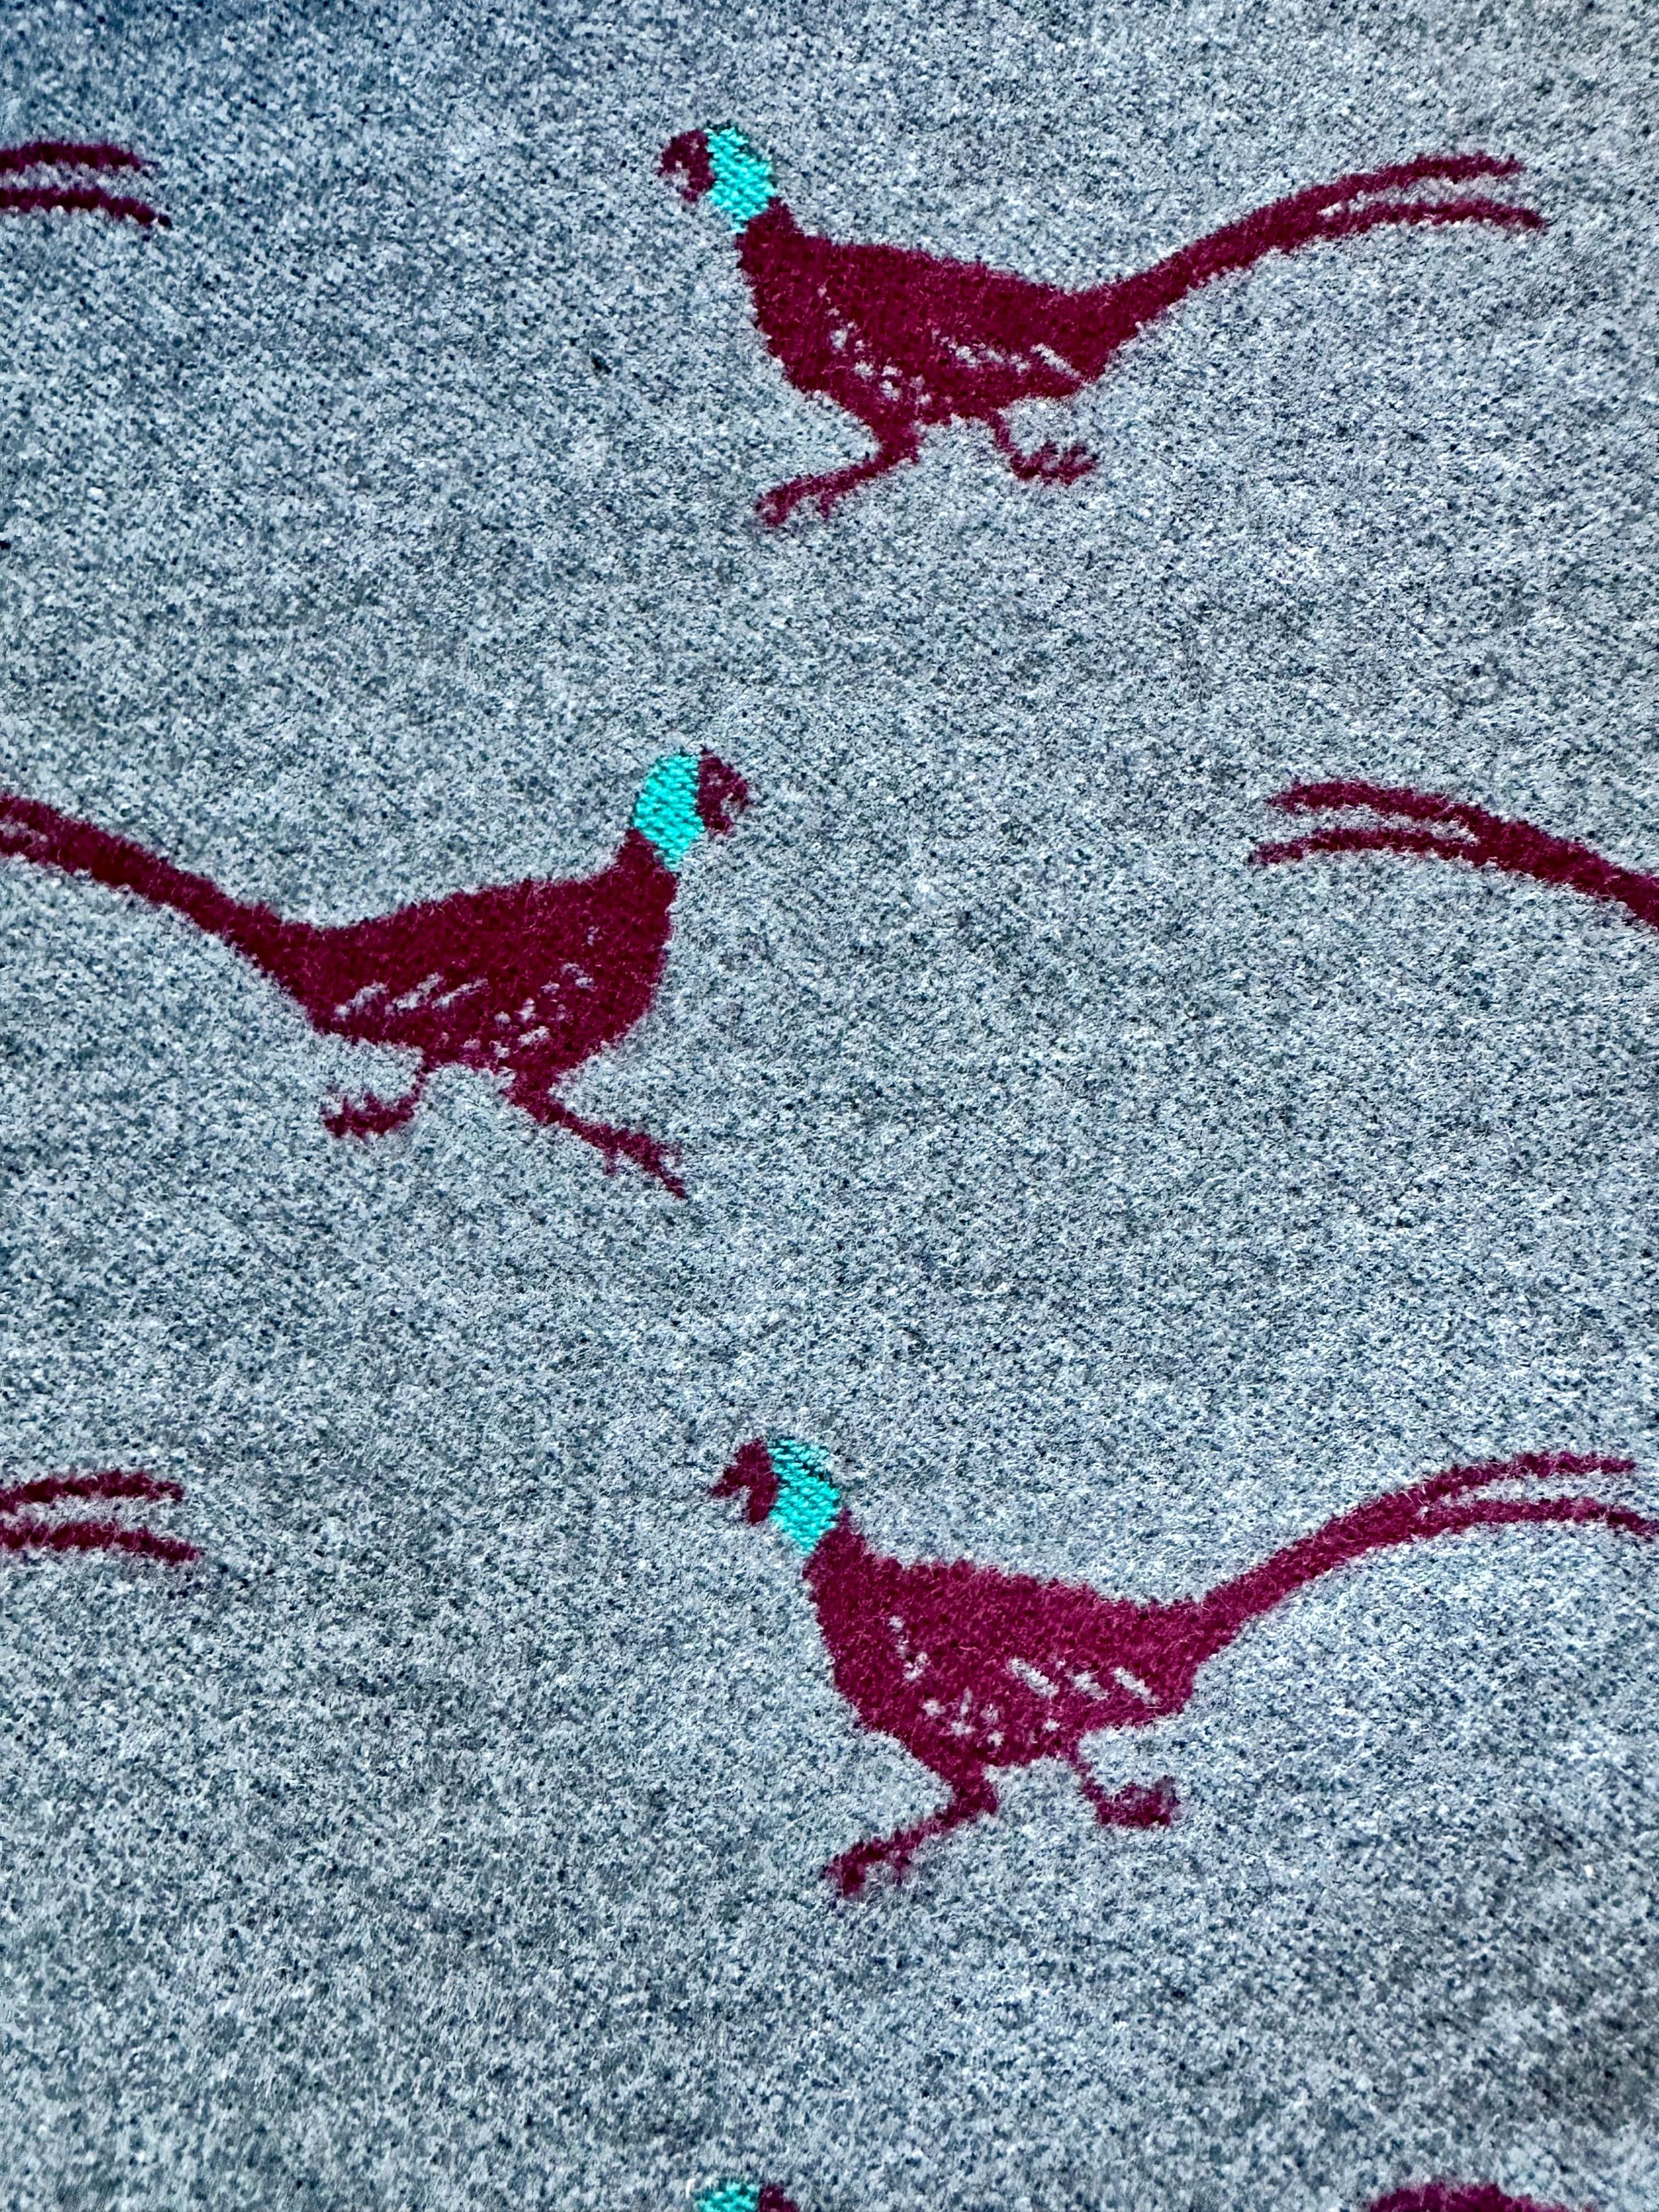 lusciousscarves Grey , Burgundy and Teal Reversible Scarf / Shawl With Pheasants Design